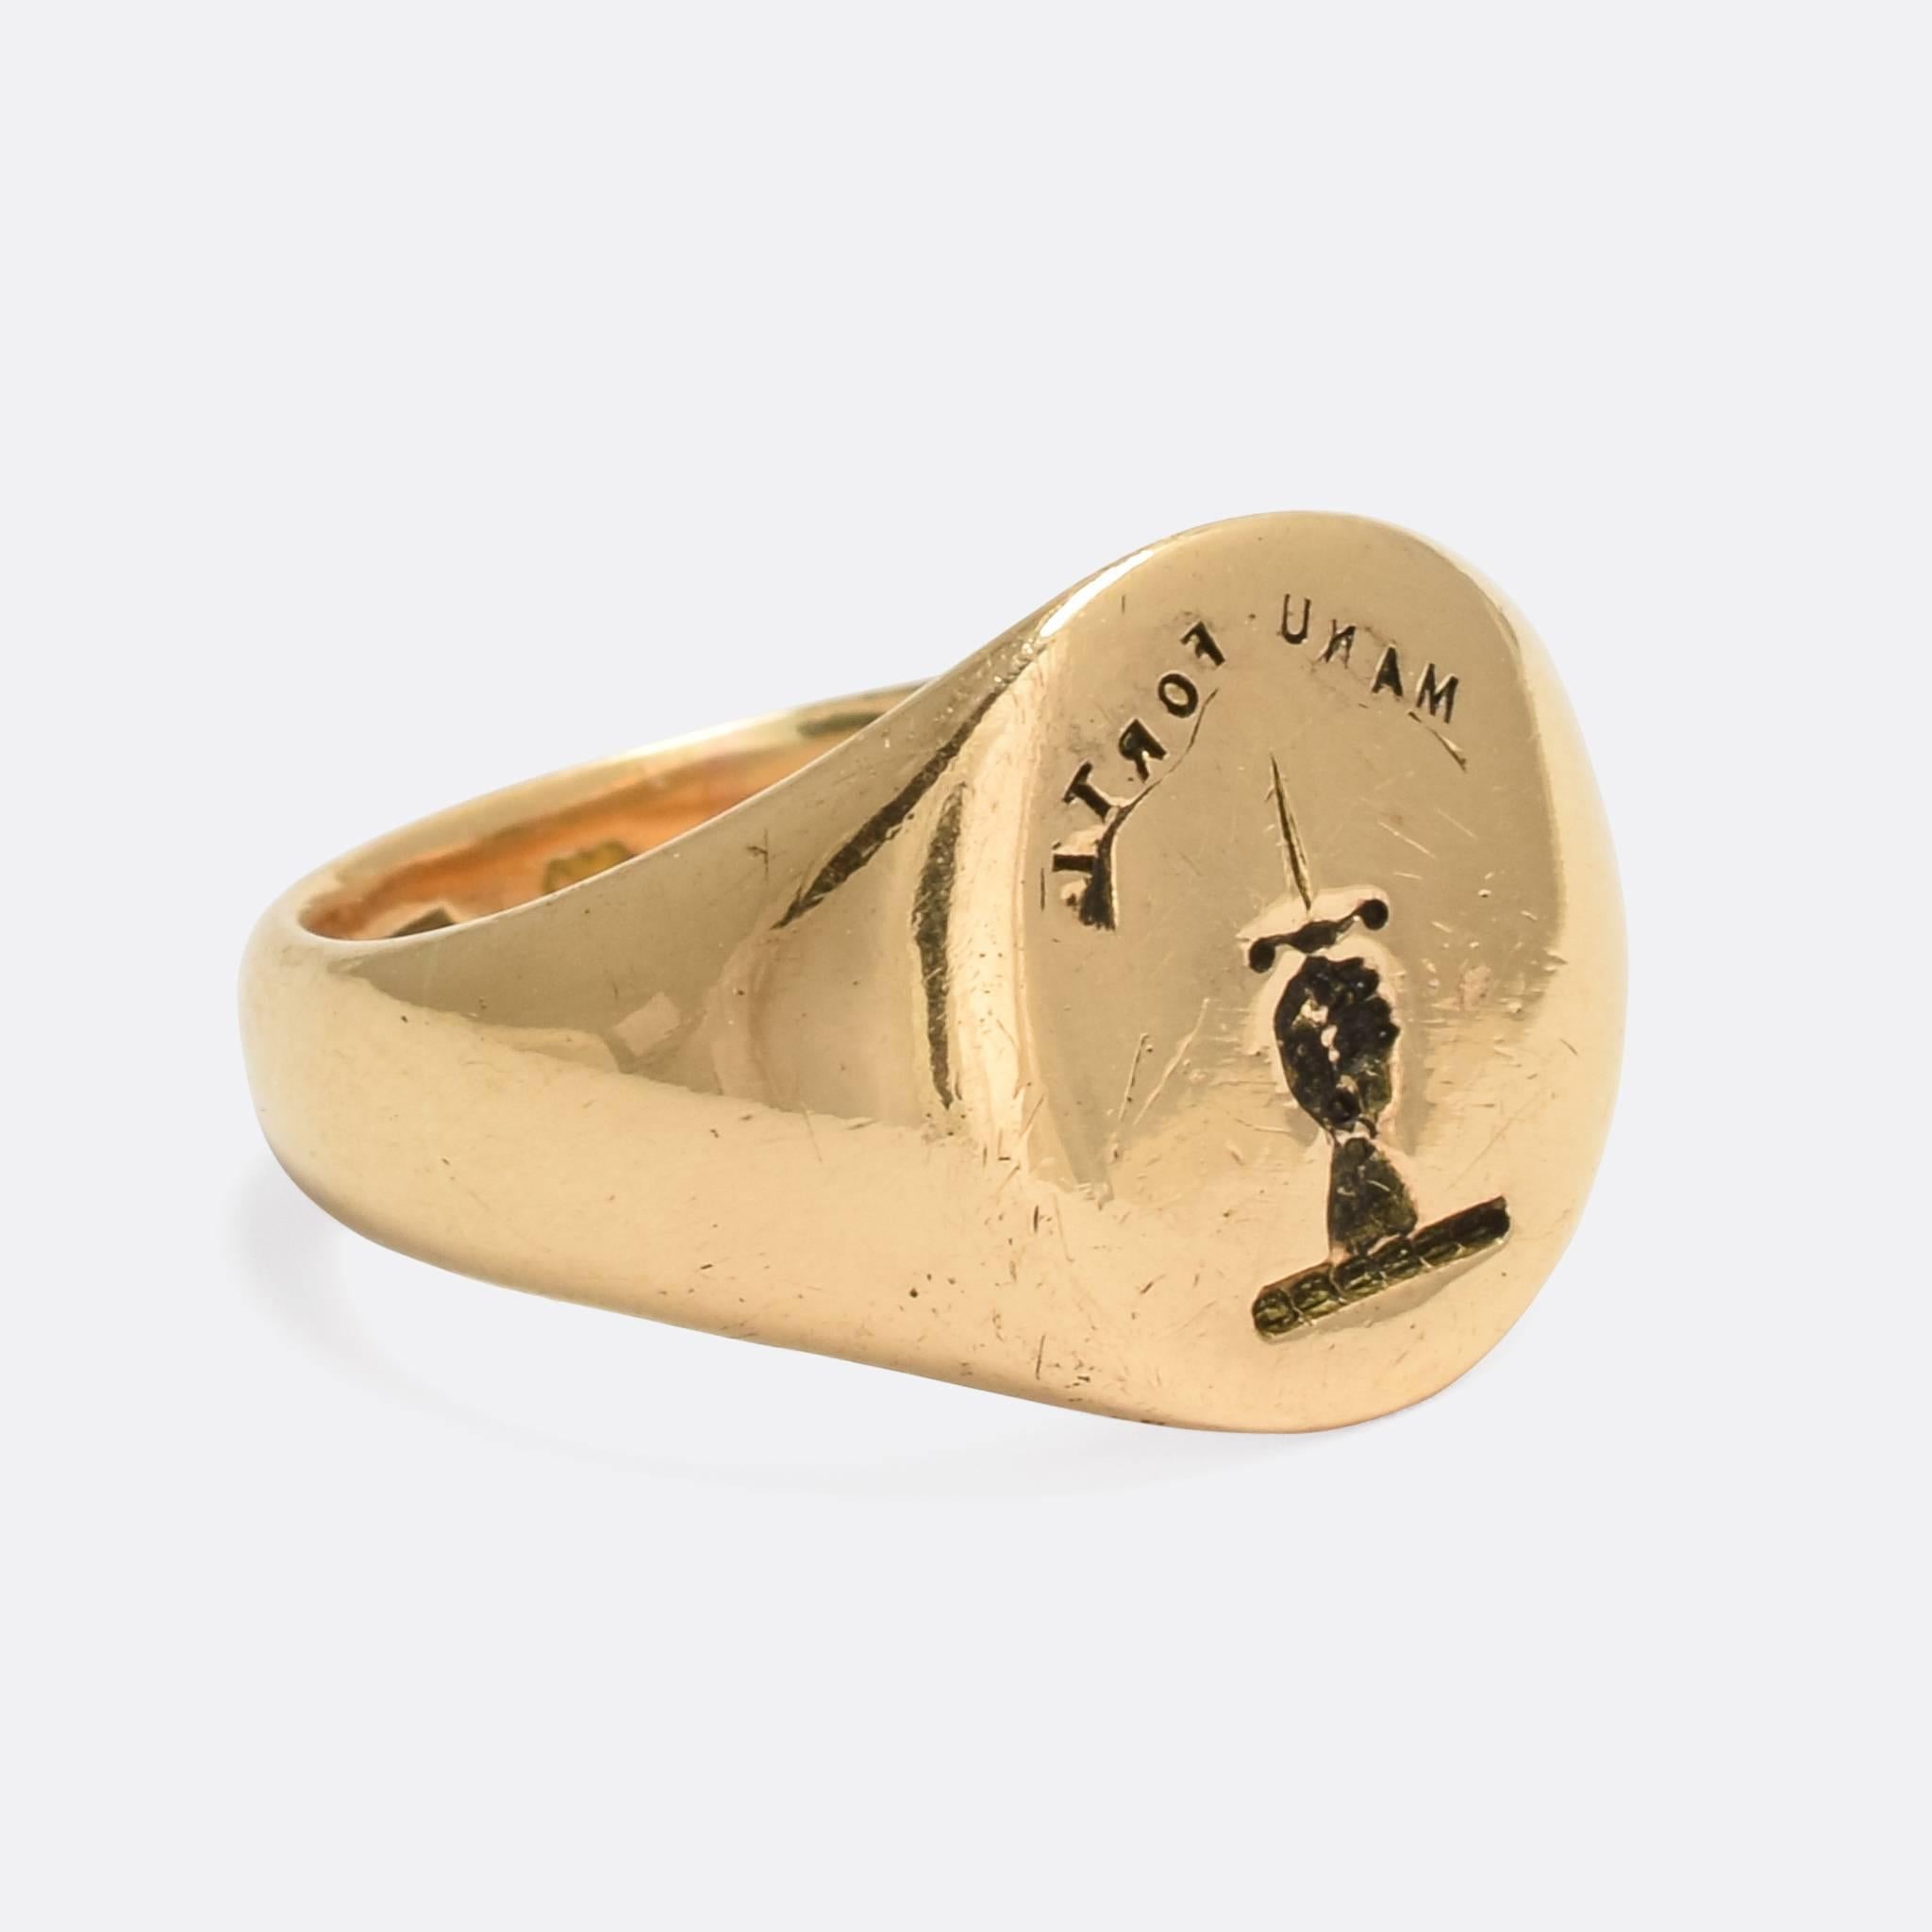 A cool antique signet ring modelled in 18 karat gold. The face is engraved with an English Heraldic crest, depicting a hand holding a dagger above the Latin motto MANU FORTI, meaning 